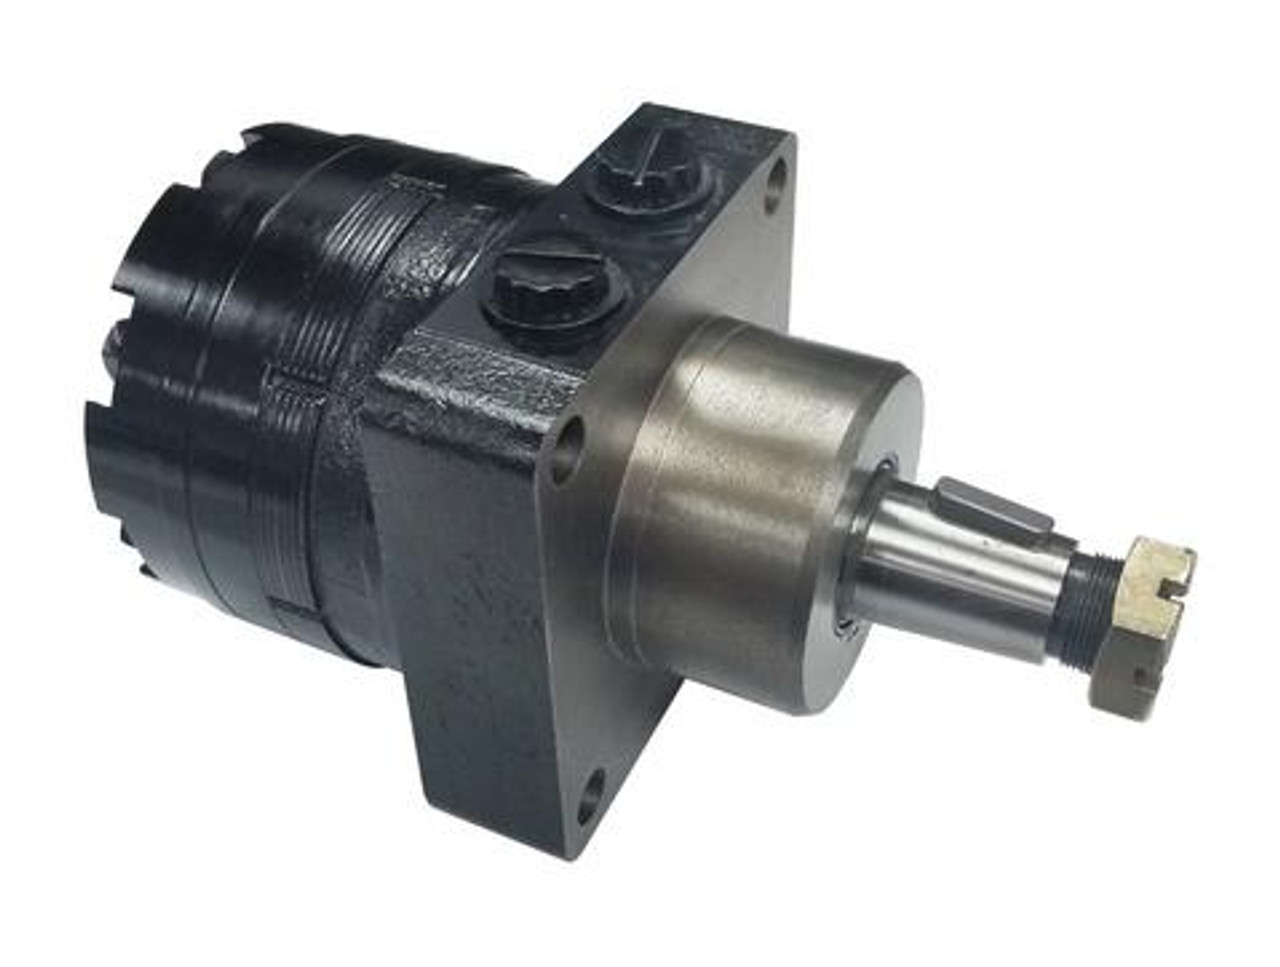  RE16673910 White Drive Products Interchange Hydraulic Motor